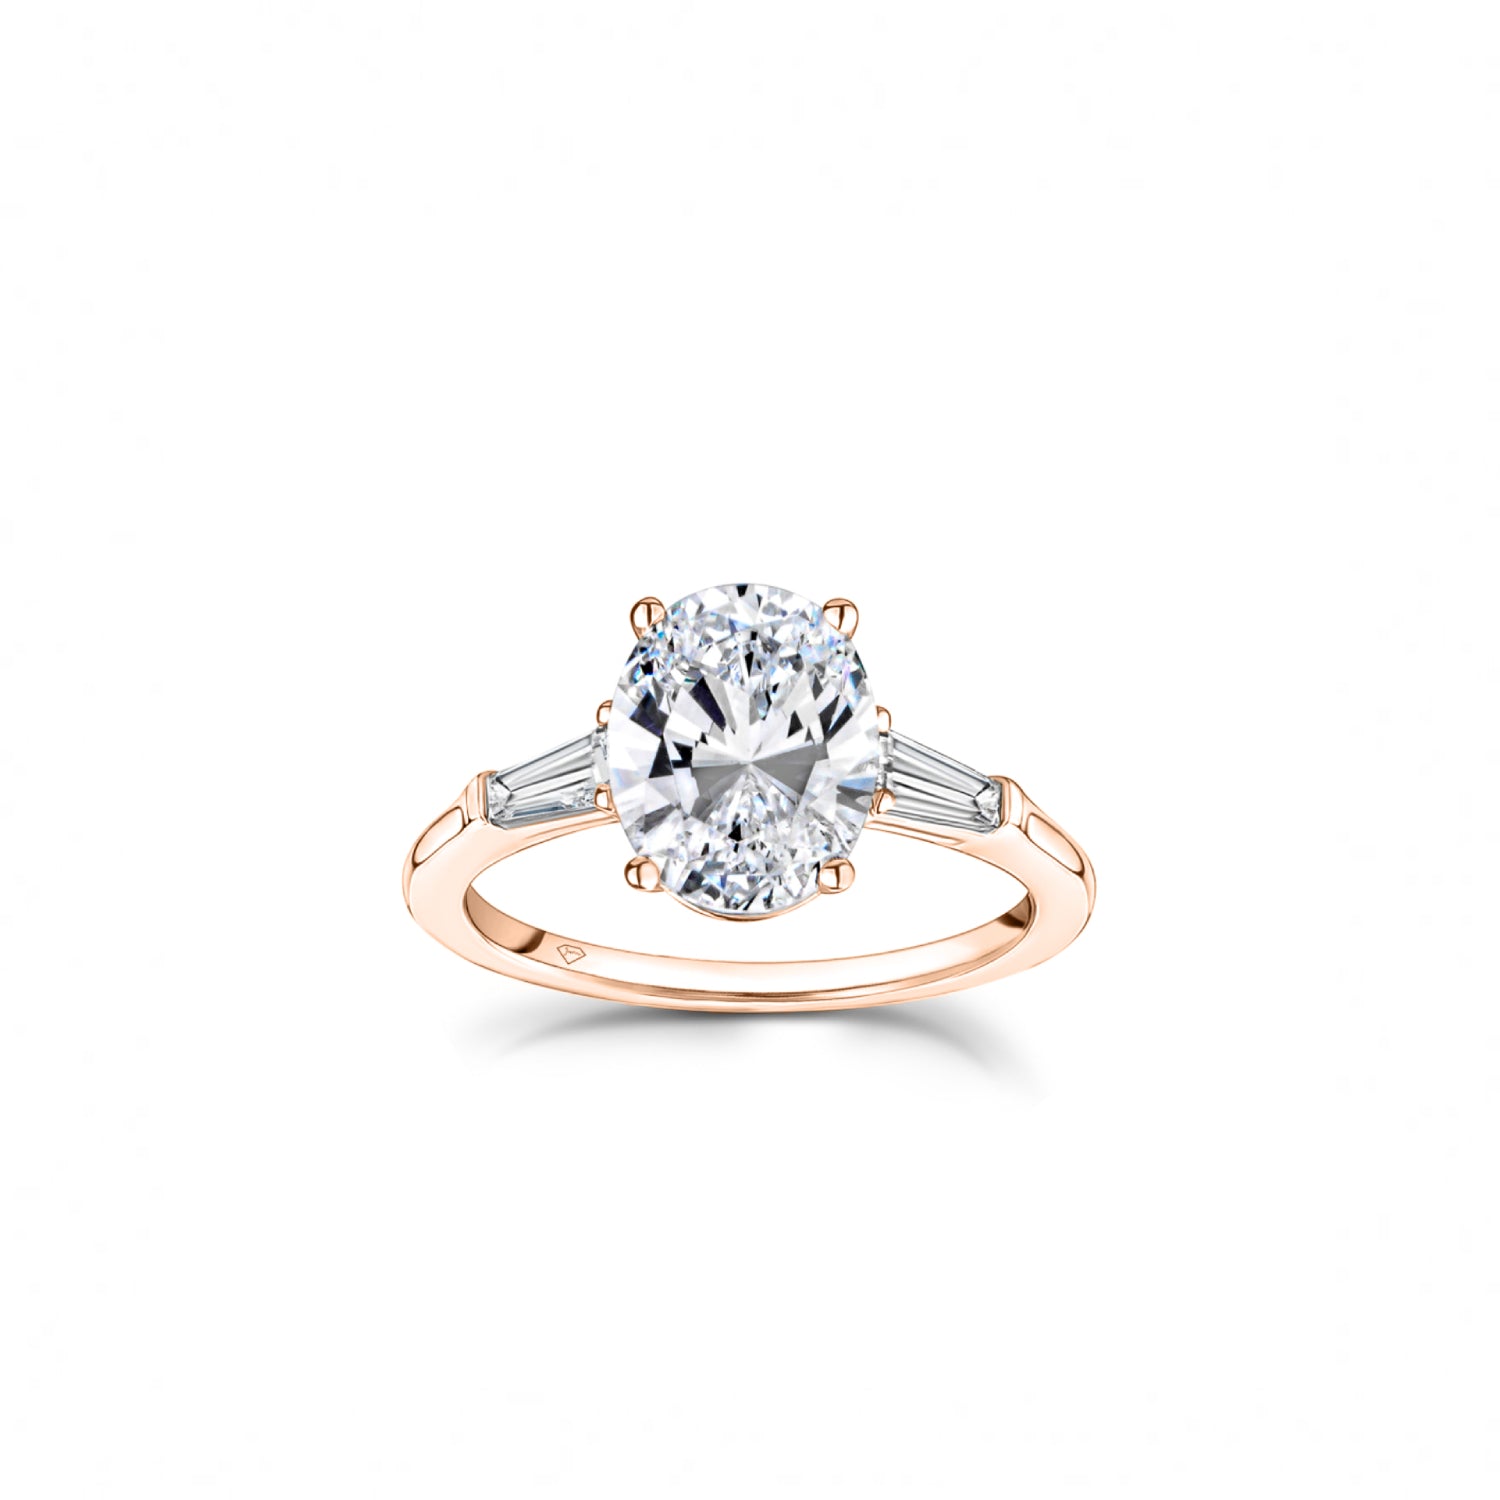 Oval and Baguette Cut Diamond Three-Stone Engagement Ring in Rose Gold